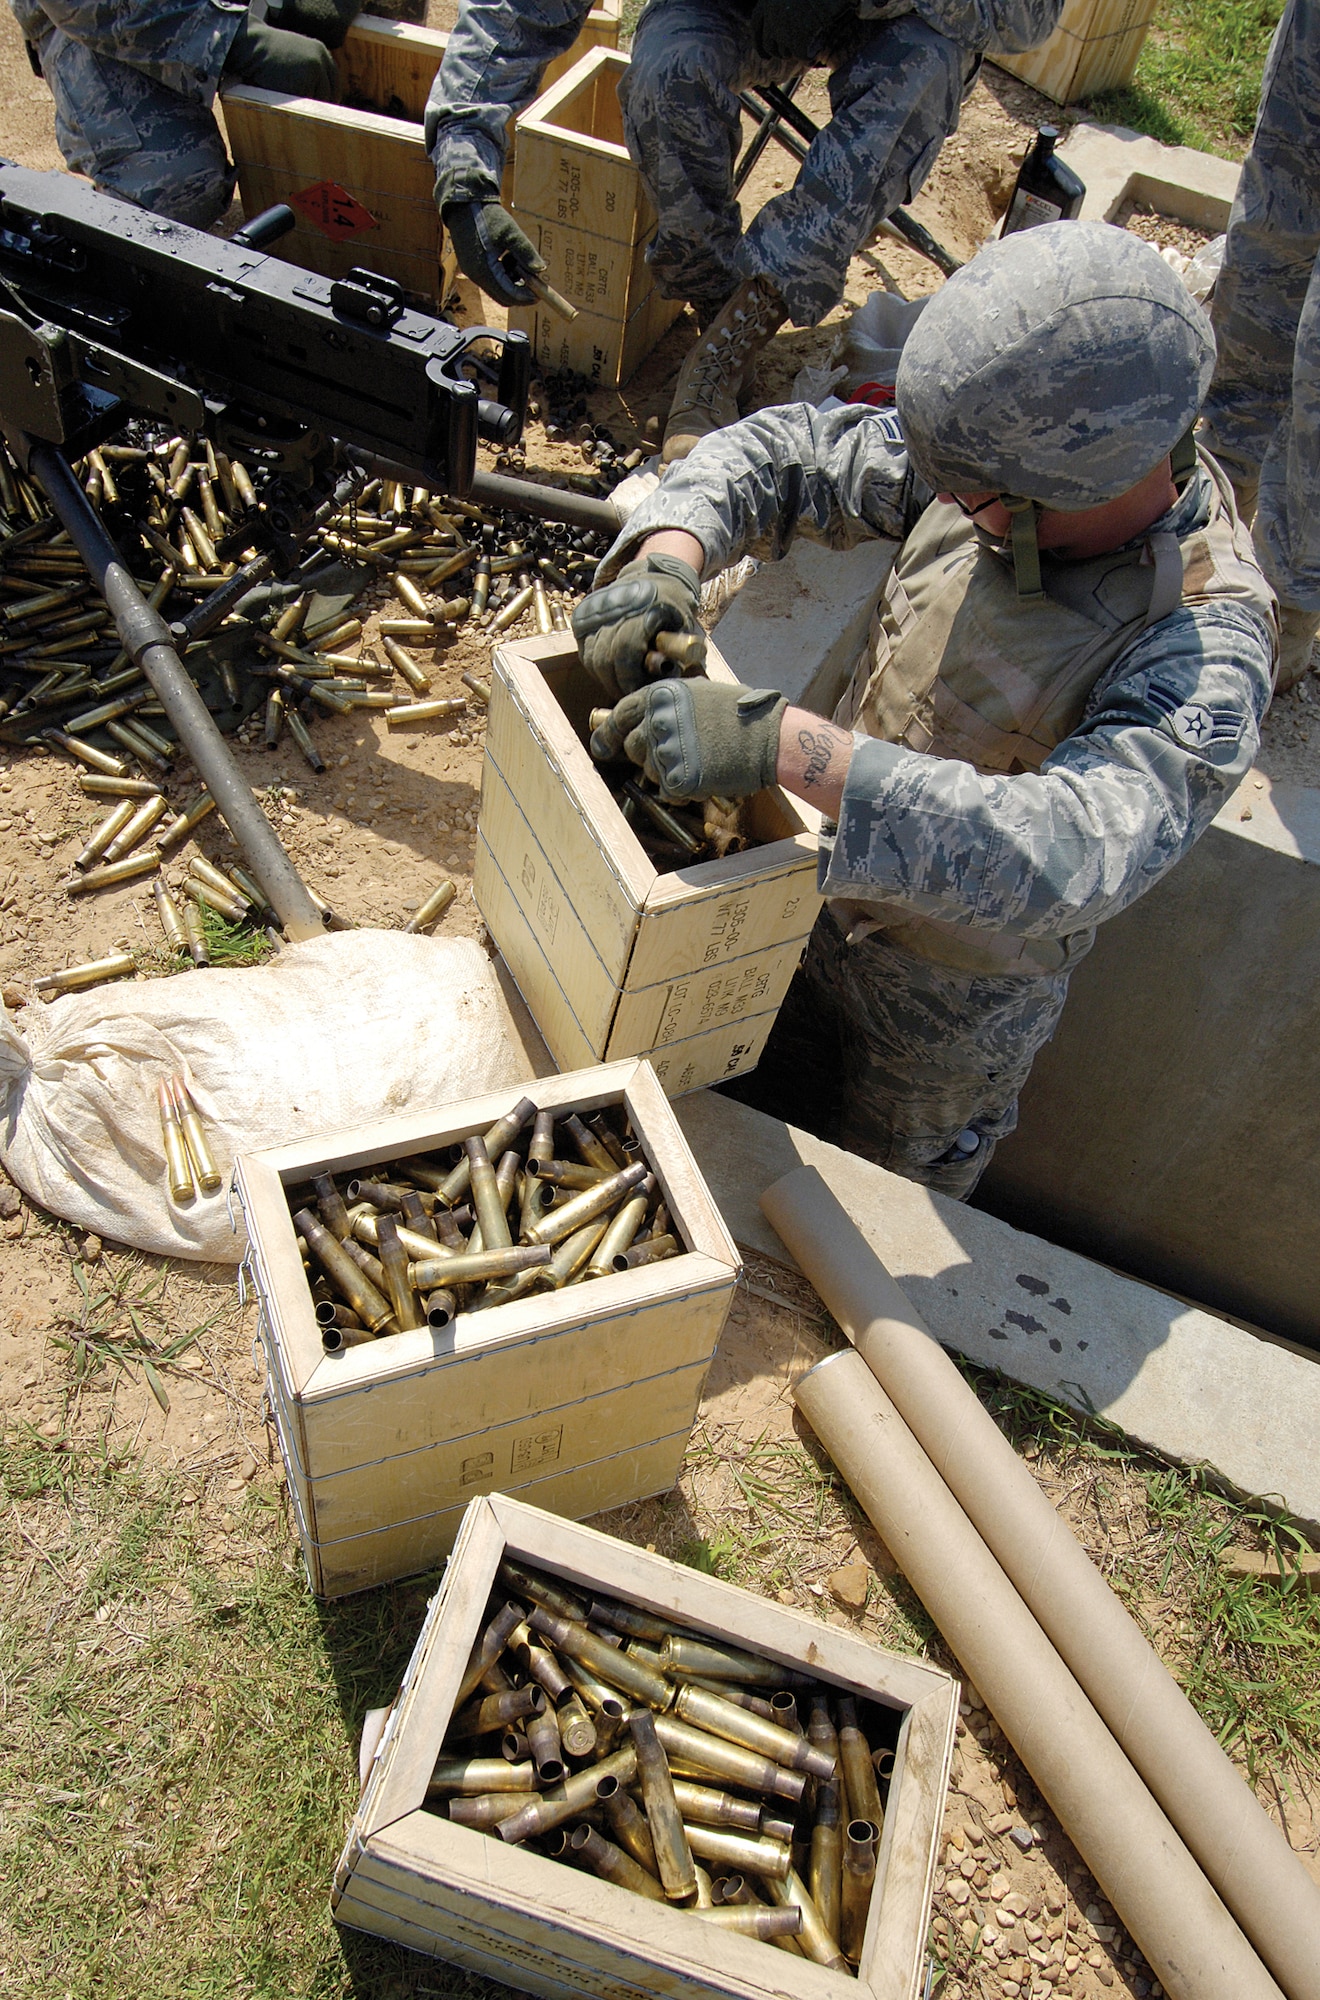 Airman 1st Class Cory Christenson loads crates with 900 empty shells from his M2 .50-caliber machine gun live-fire training June 9 at the Camp Gruber Training Center. With a firing report that is fearsome and felt and can rattle and chip teeth of the unprepared, first-time firer Airman Christenson said it was an “awesome” experience. (Air Force photos by Margo Wright)